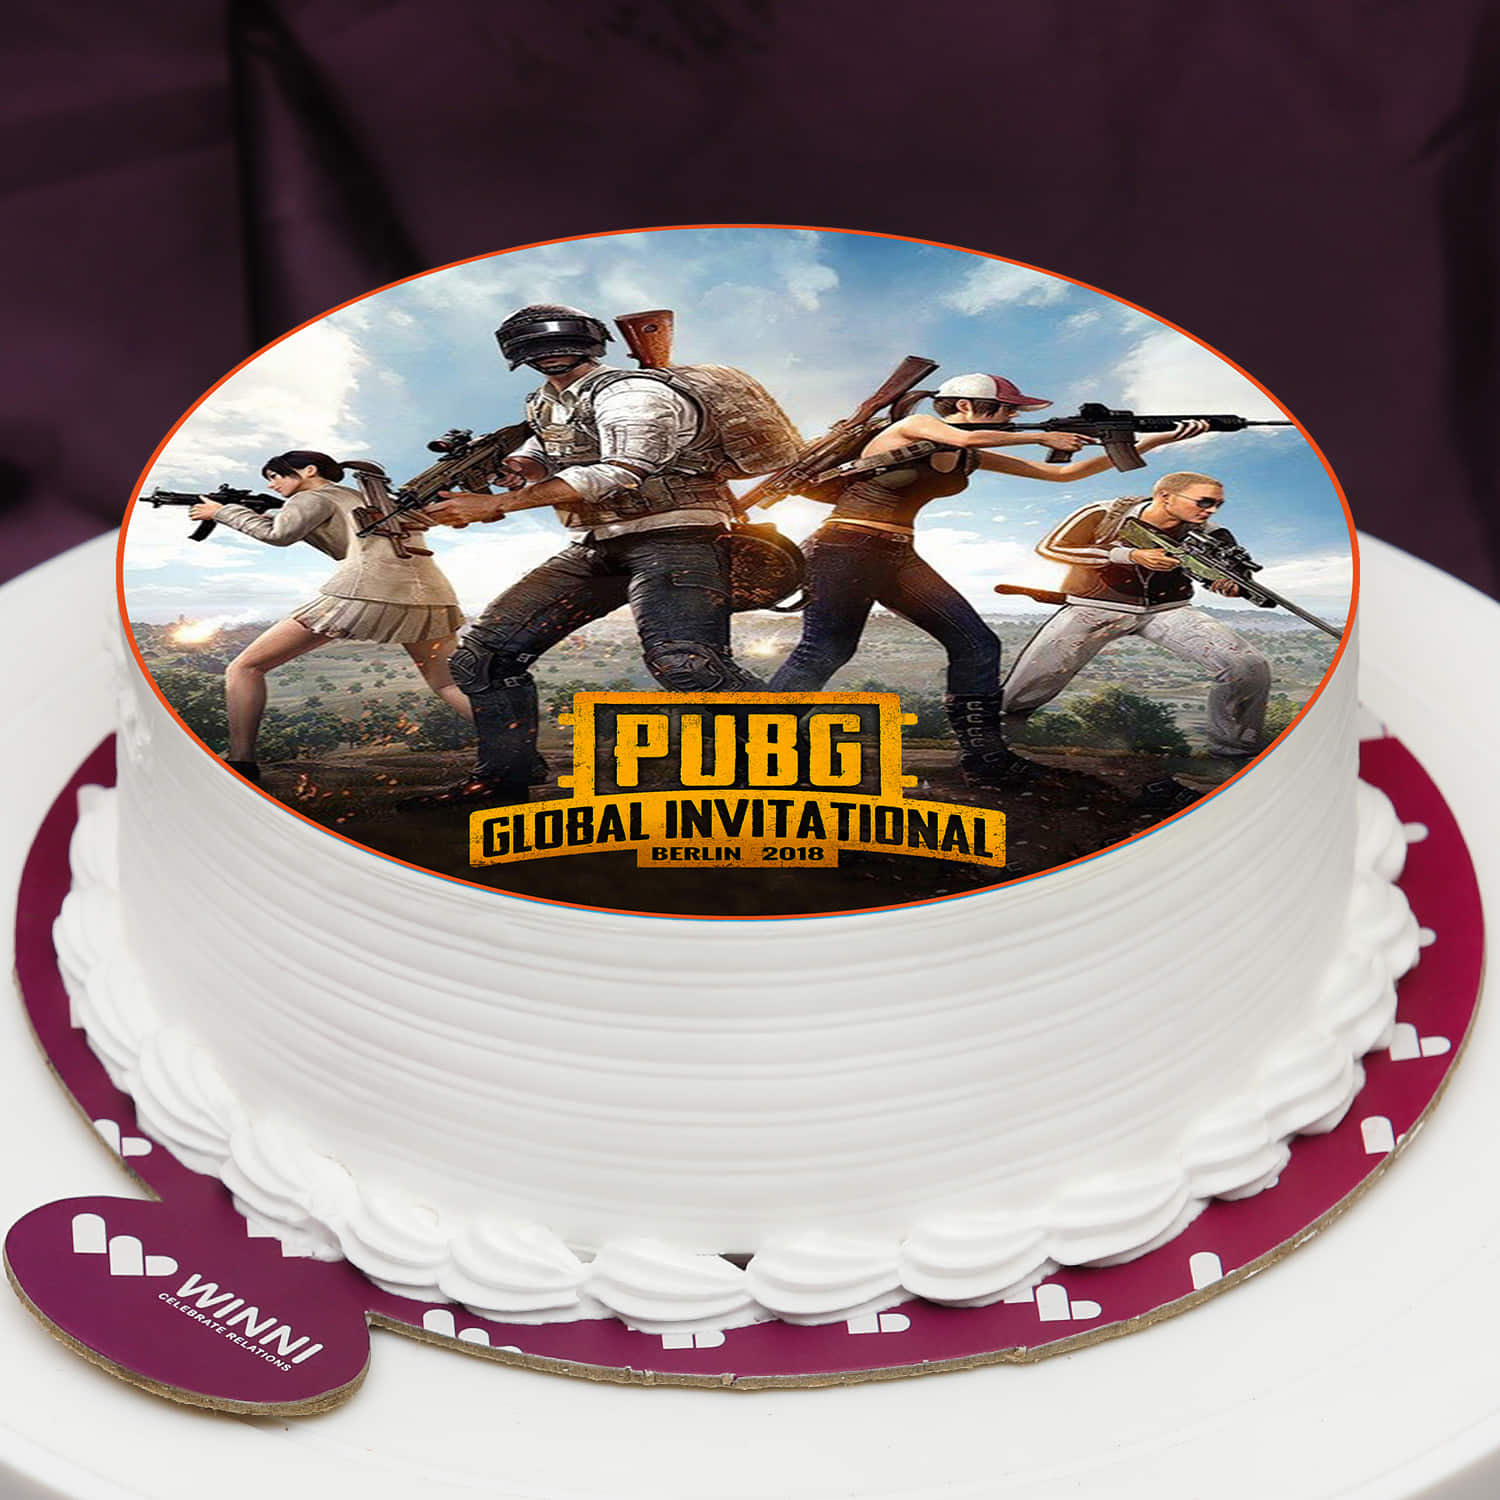 Discover more than 87 pubg cake 1kg super hot - awesomeenglish.edu.vn